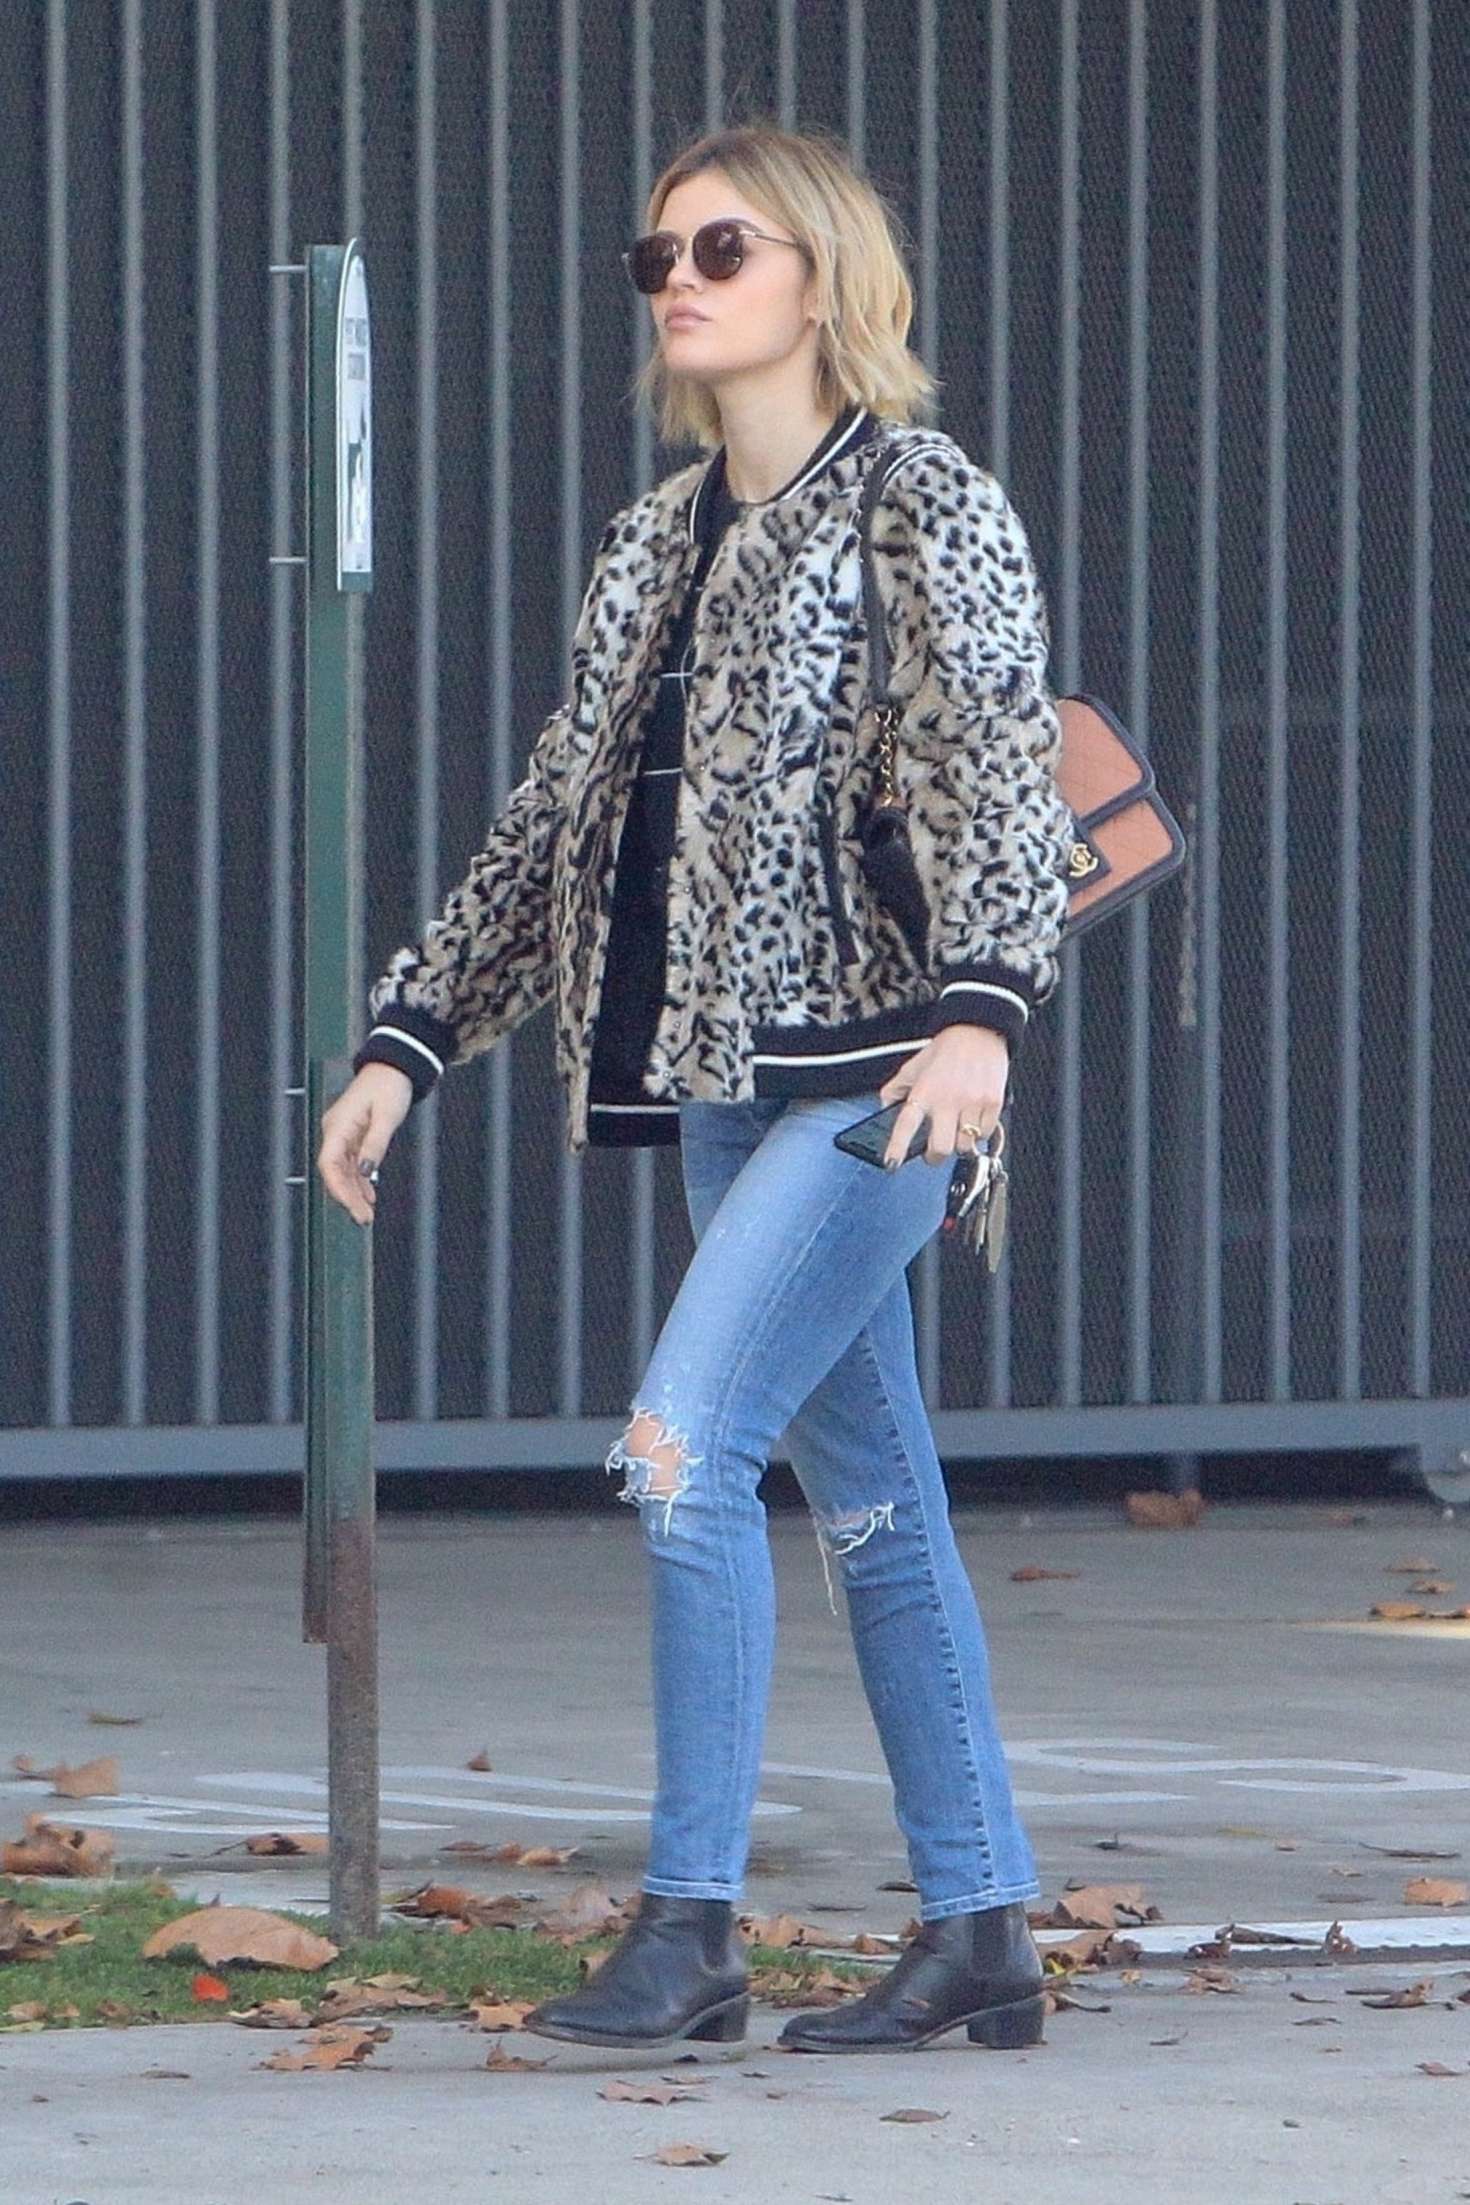 Lucy Hale in Animal Print Jacket â€“ Out in Los Angeles